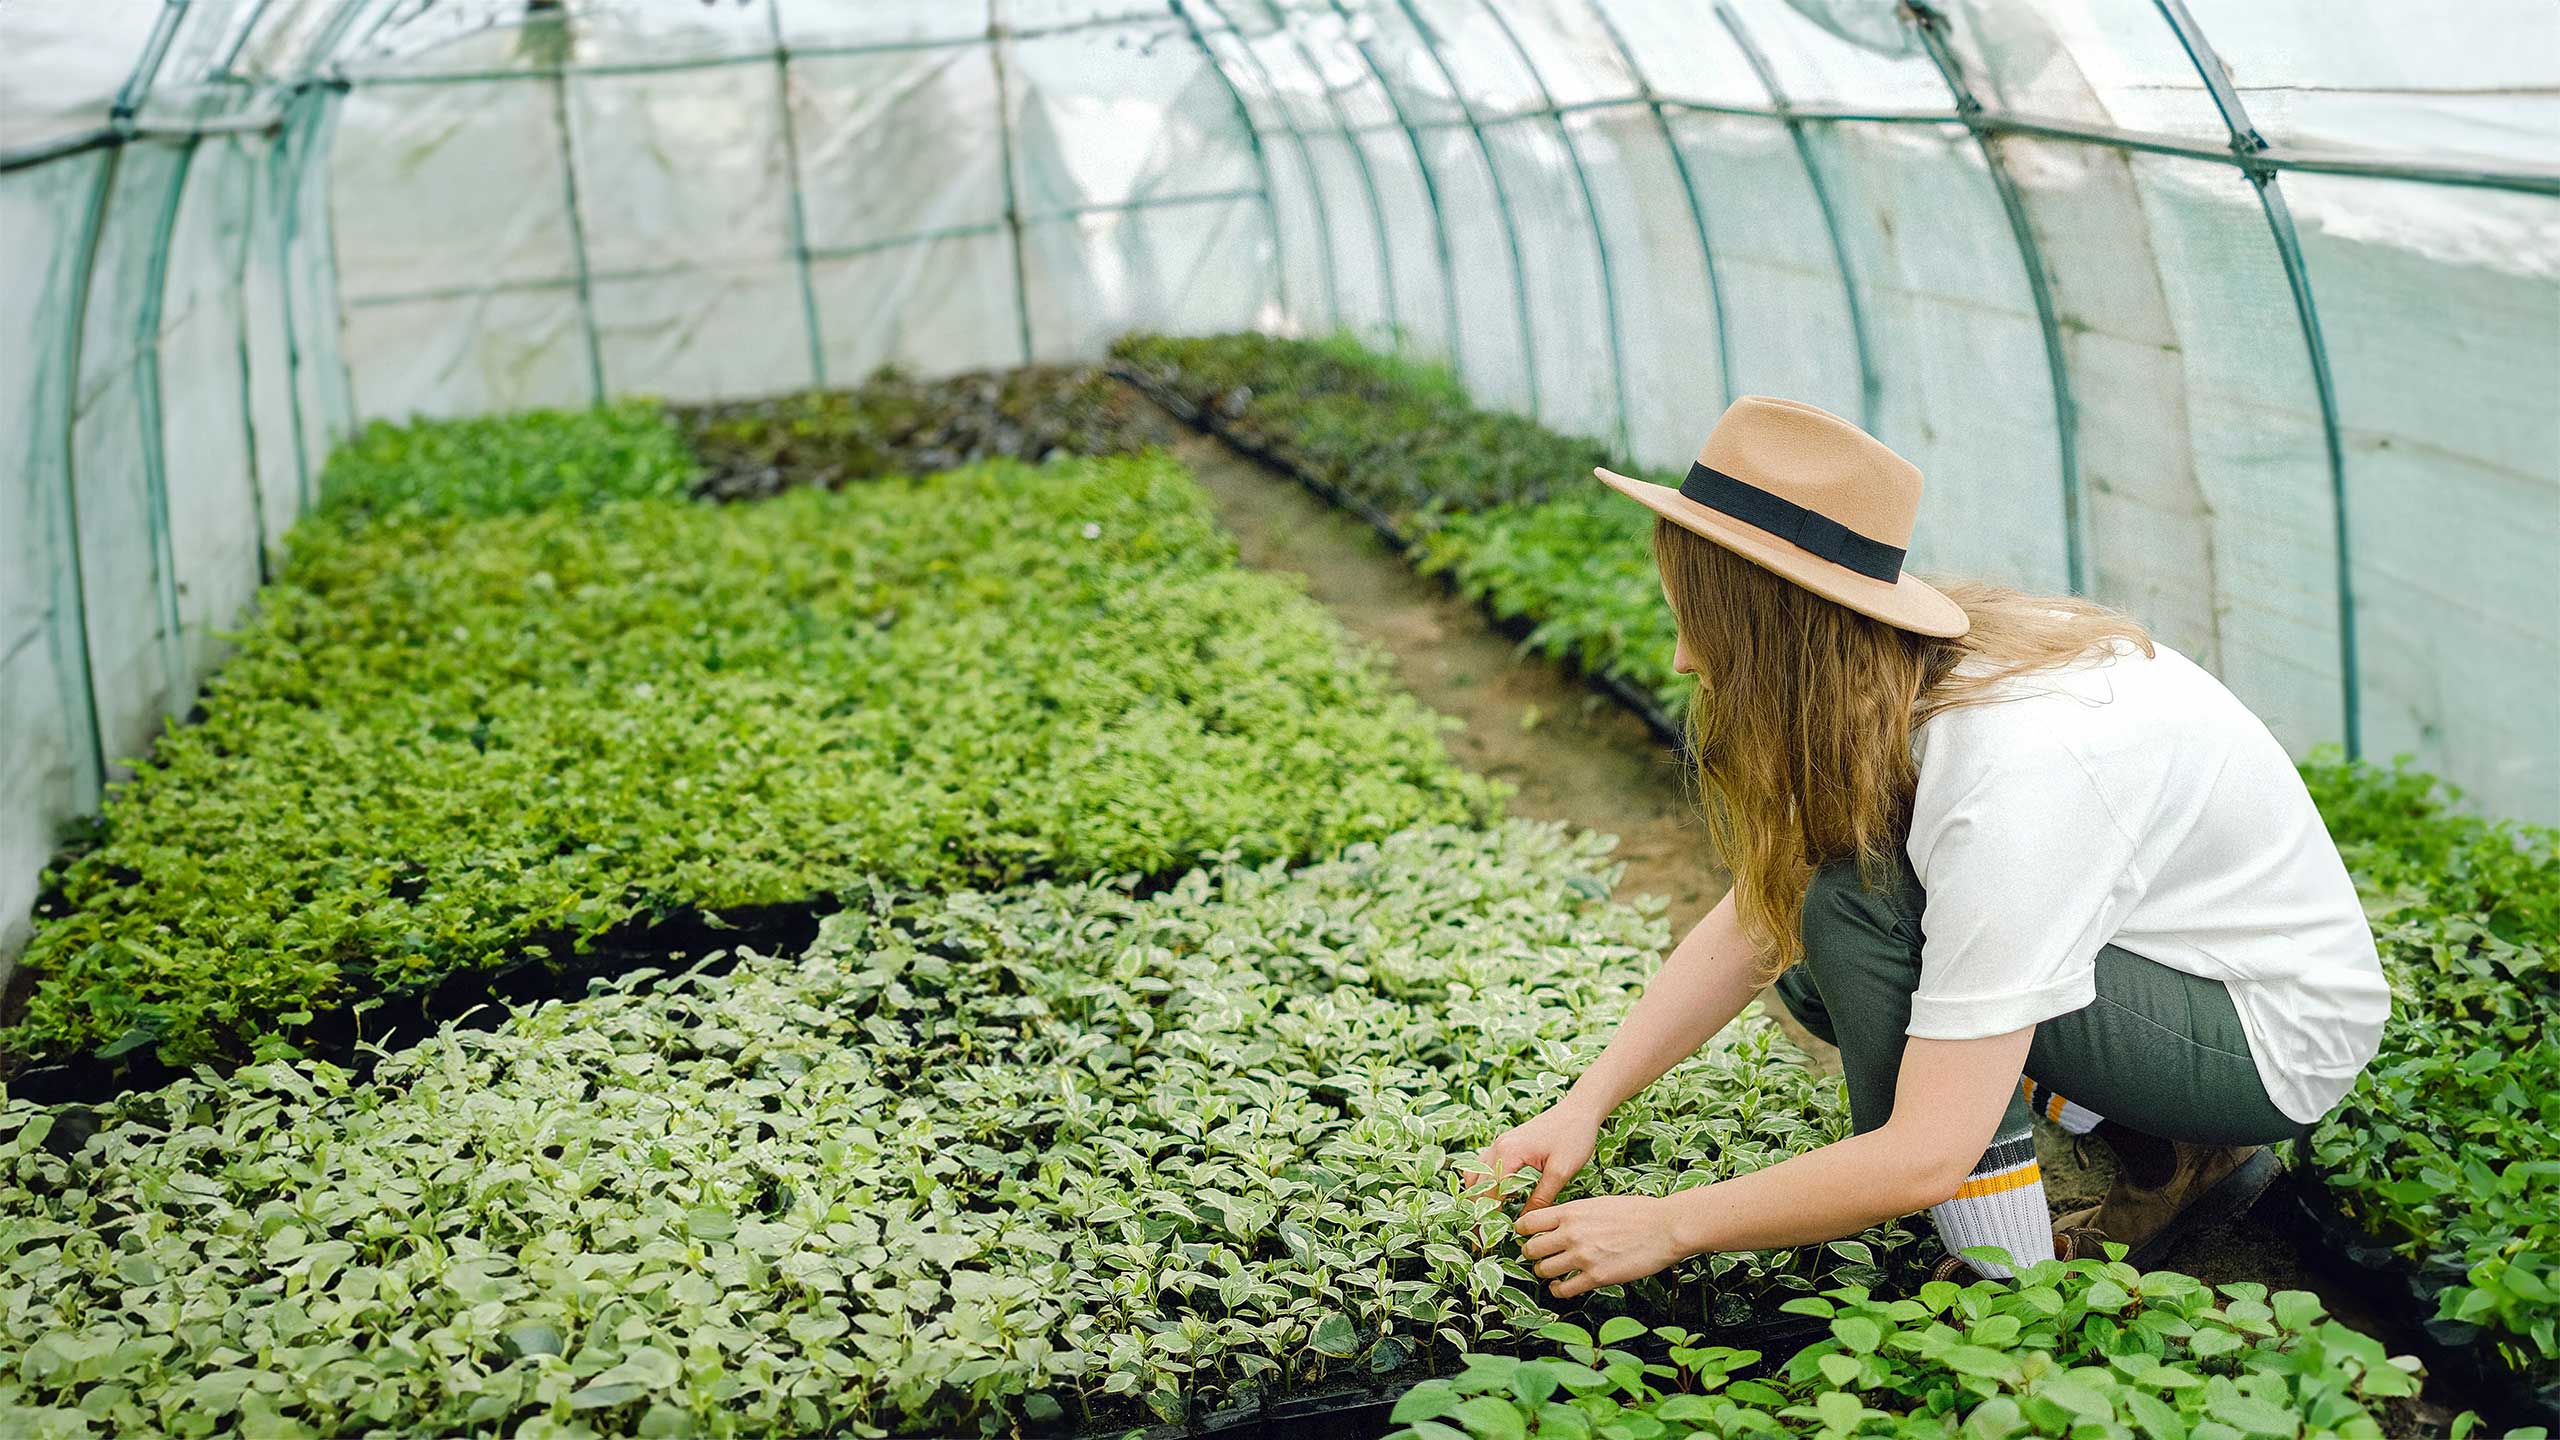 Young person tending to herbs in greenhouse tent garden